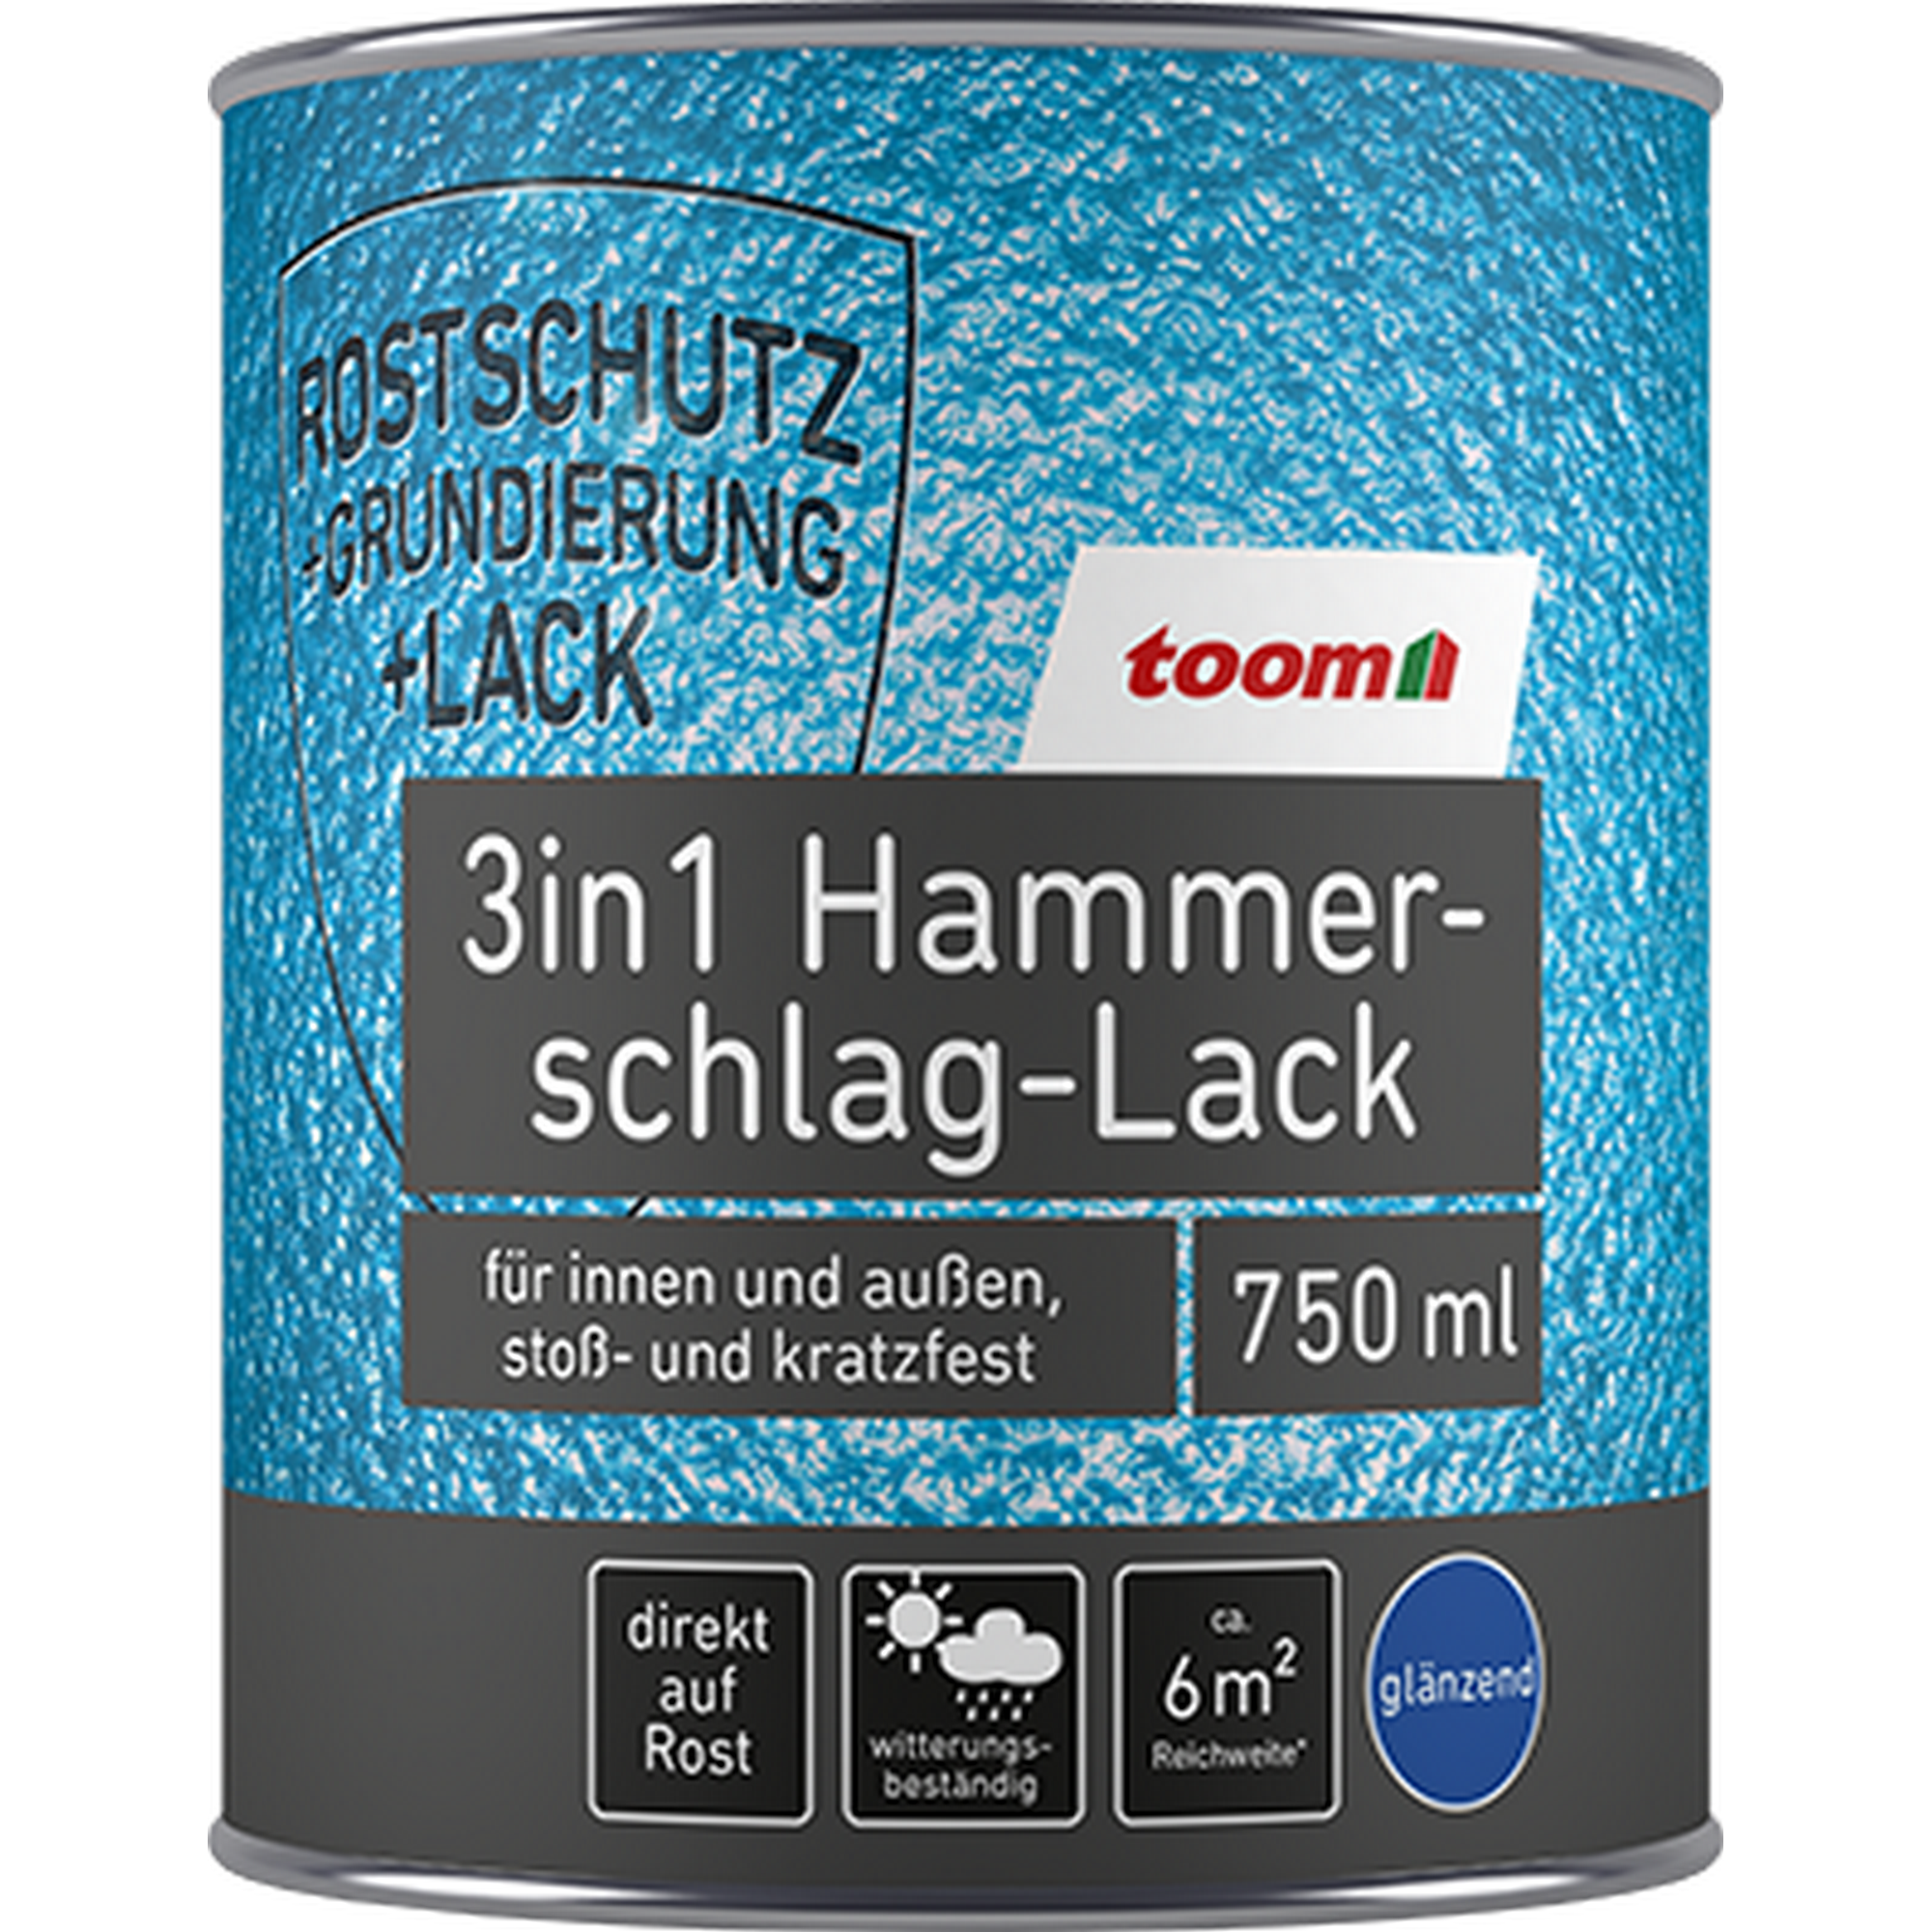 3in1 Hammerschlag-Lack kupfer 750 ml + product picture